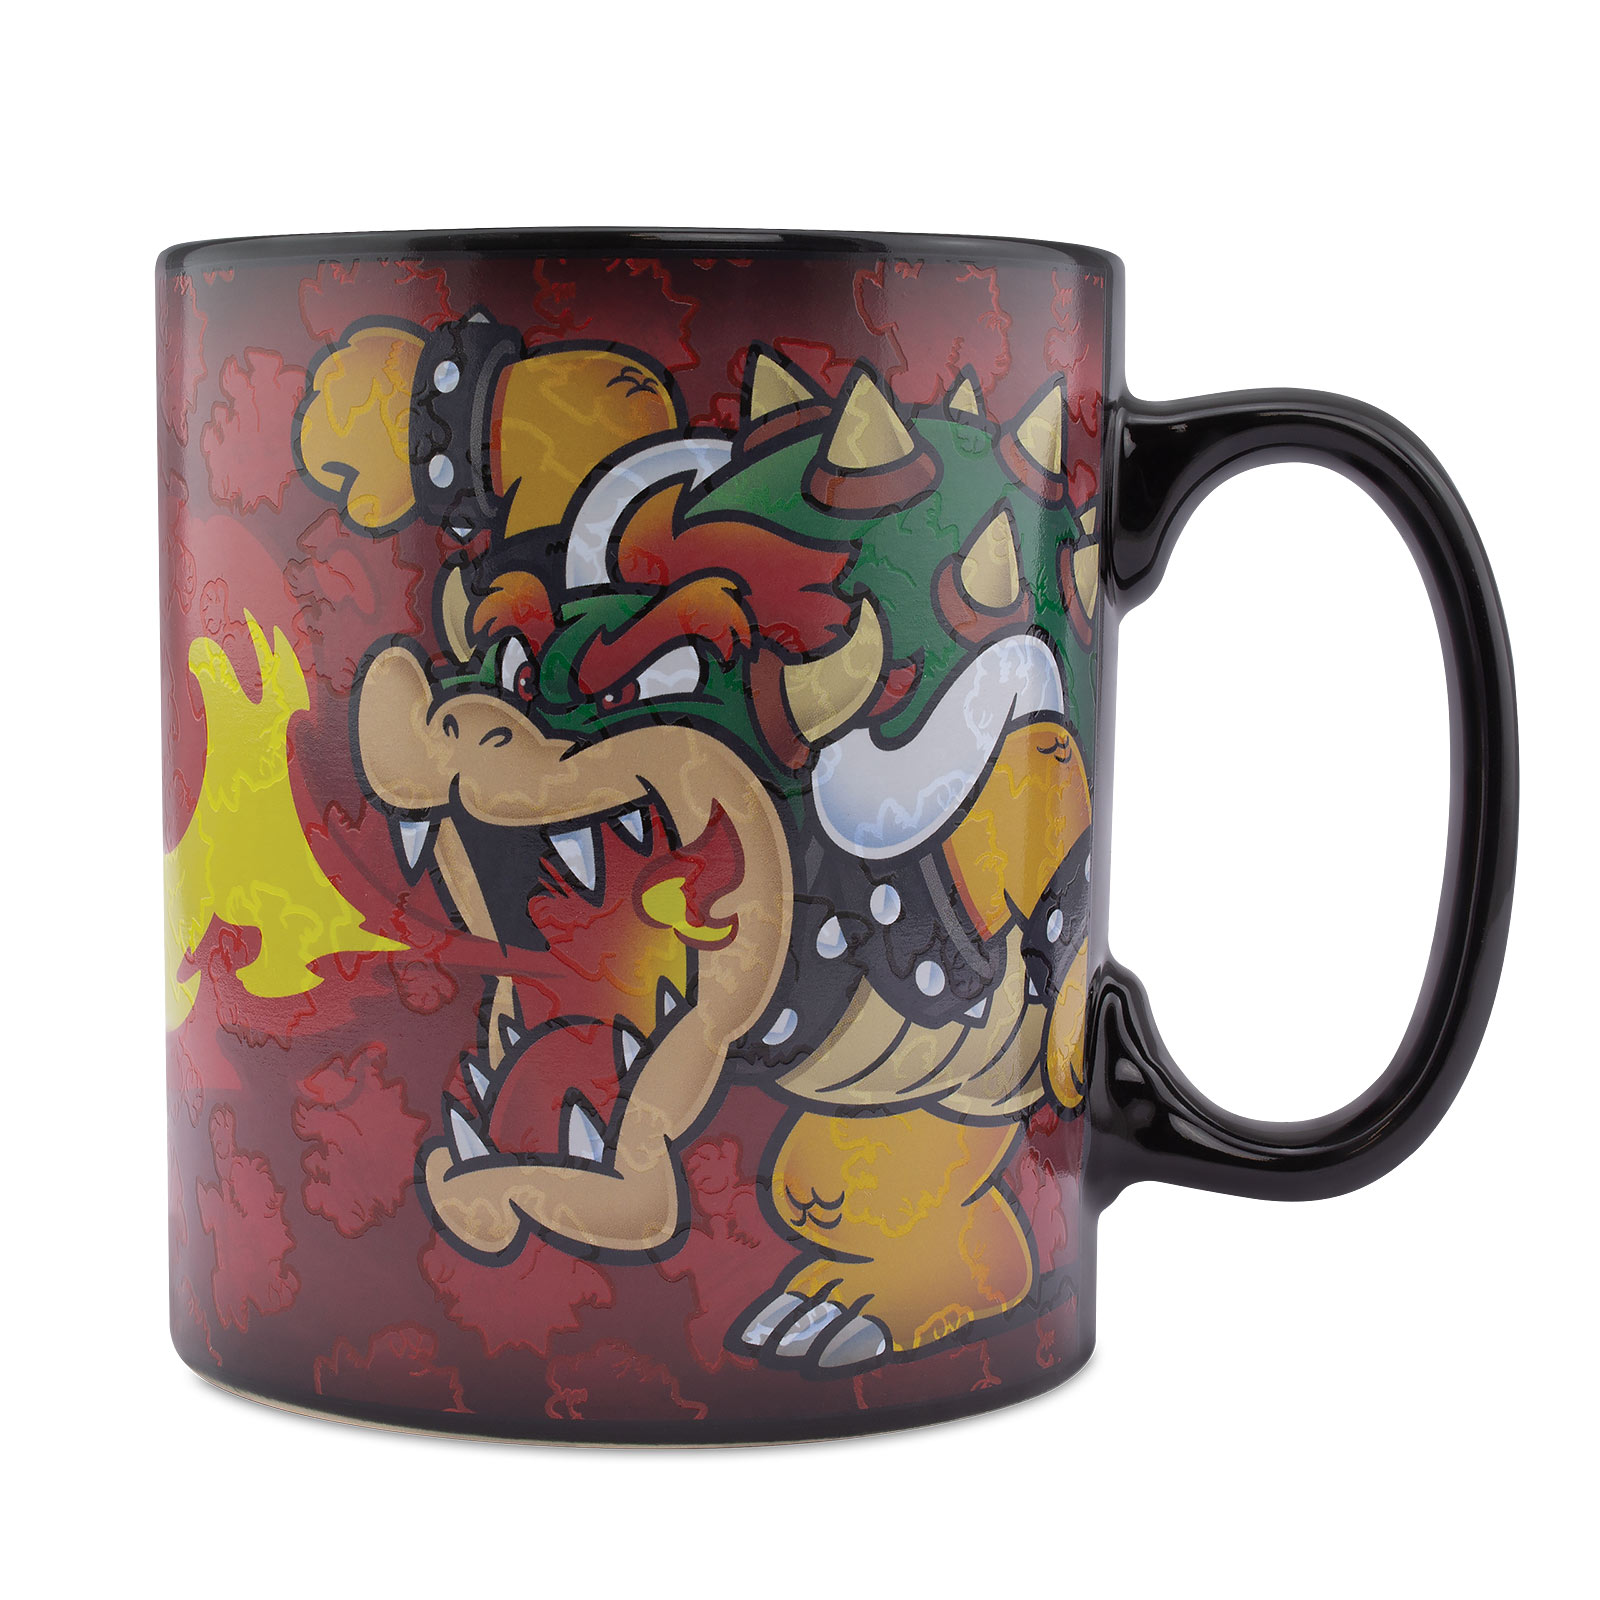 Super Mario - Bowser Thermoeffect Beker